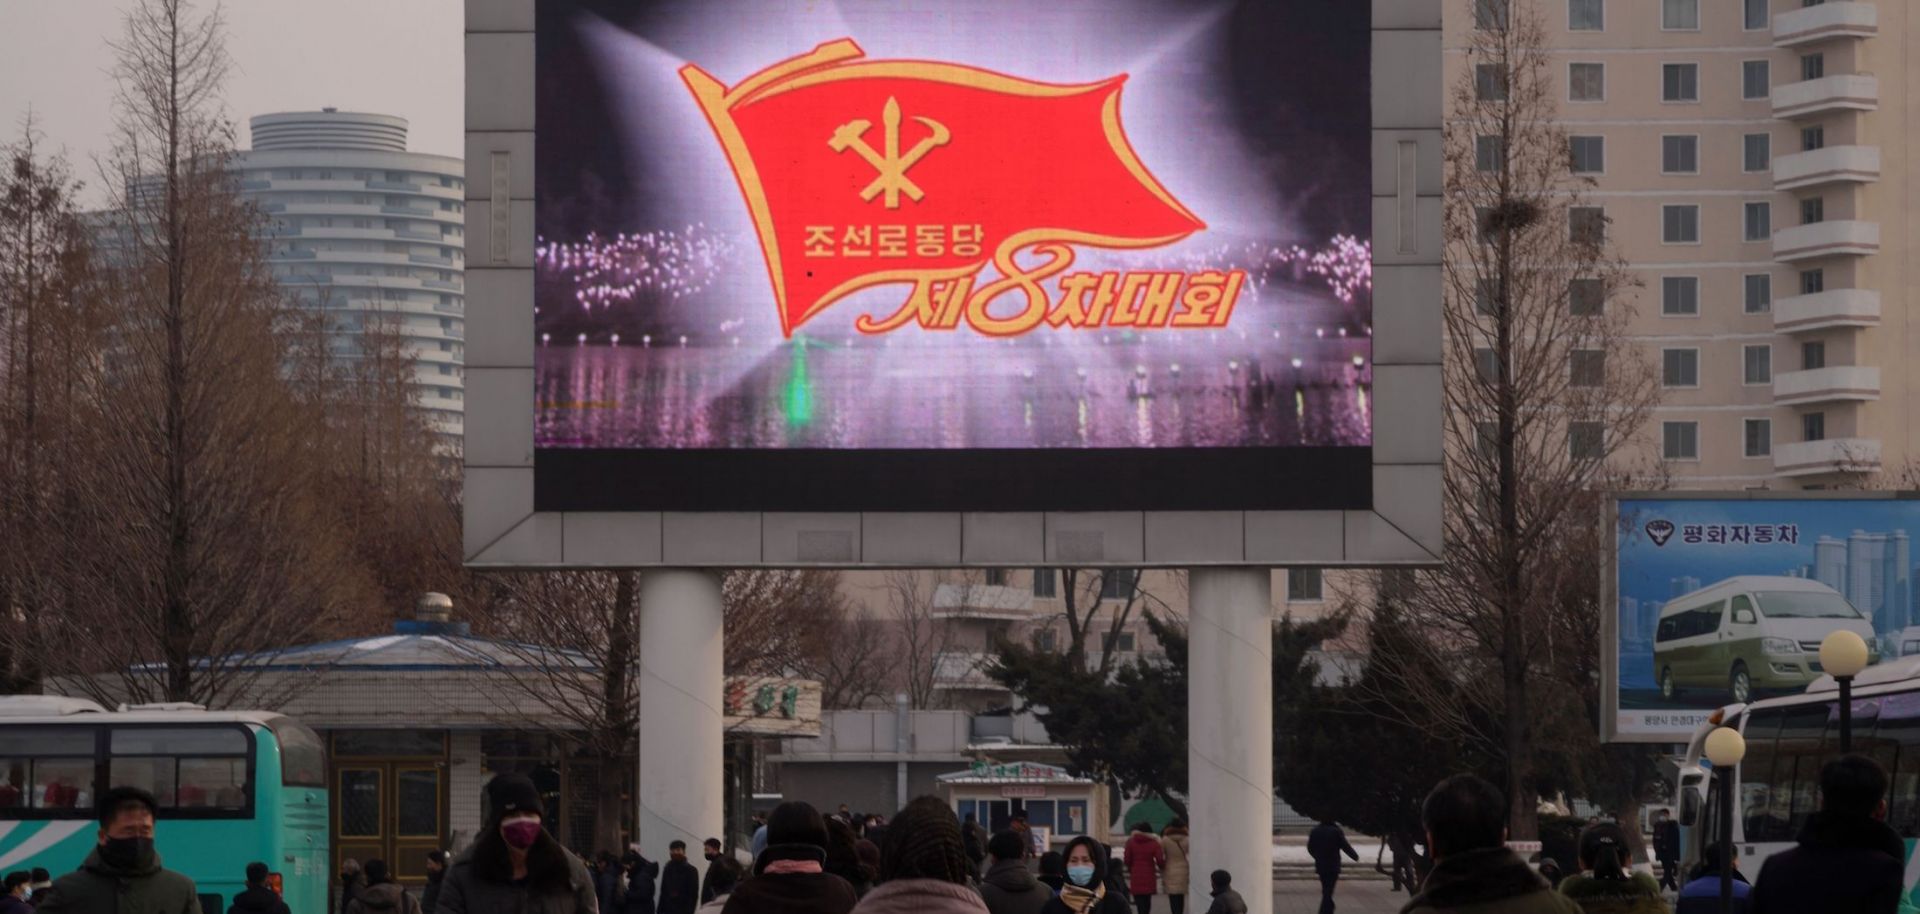 A news broadcast on a public television screen shows coverage of the 8th Congress of the Workers' Party of Korea in the North Korean capital of Pyongyang on Jan.11, 2021.